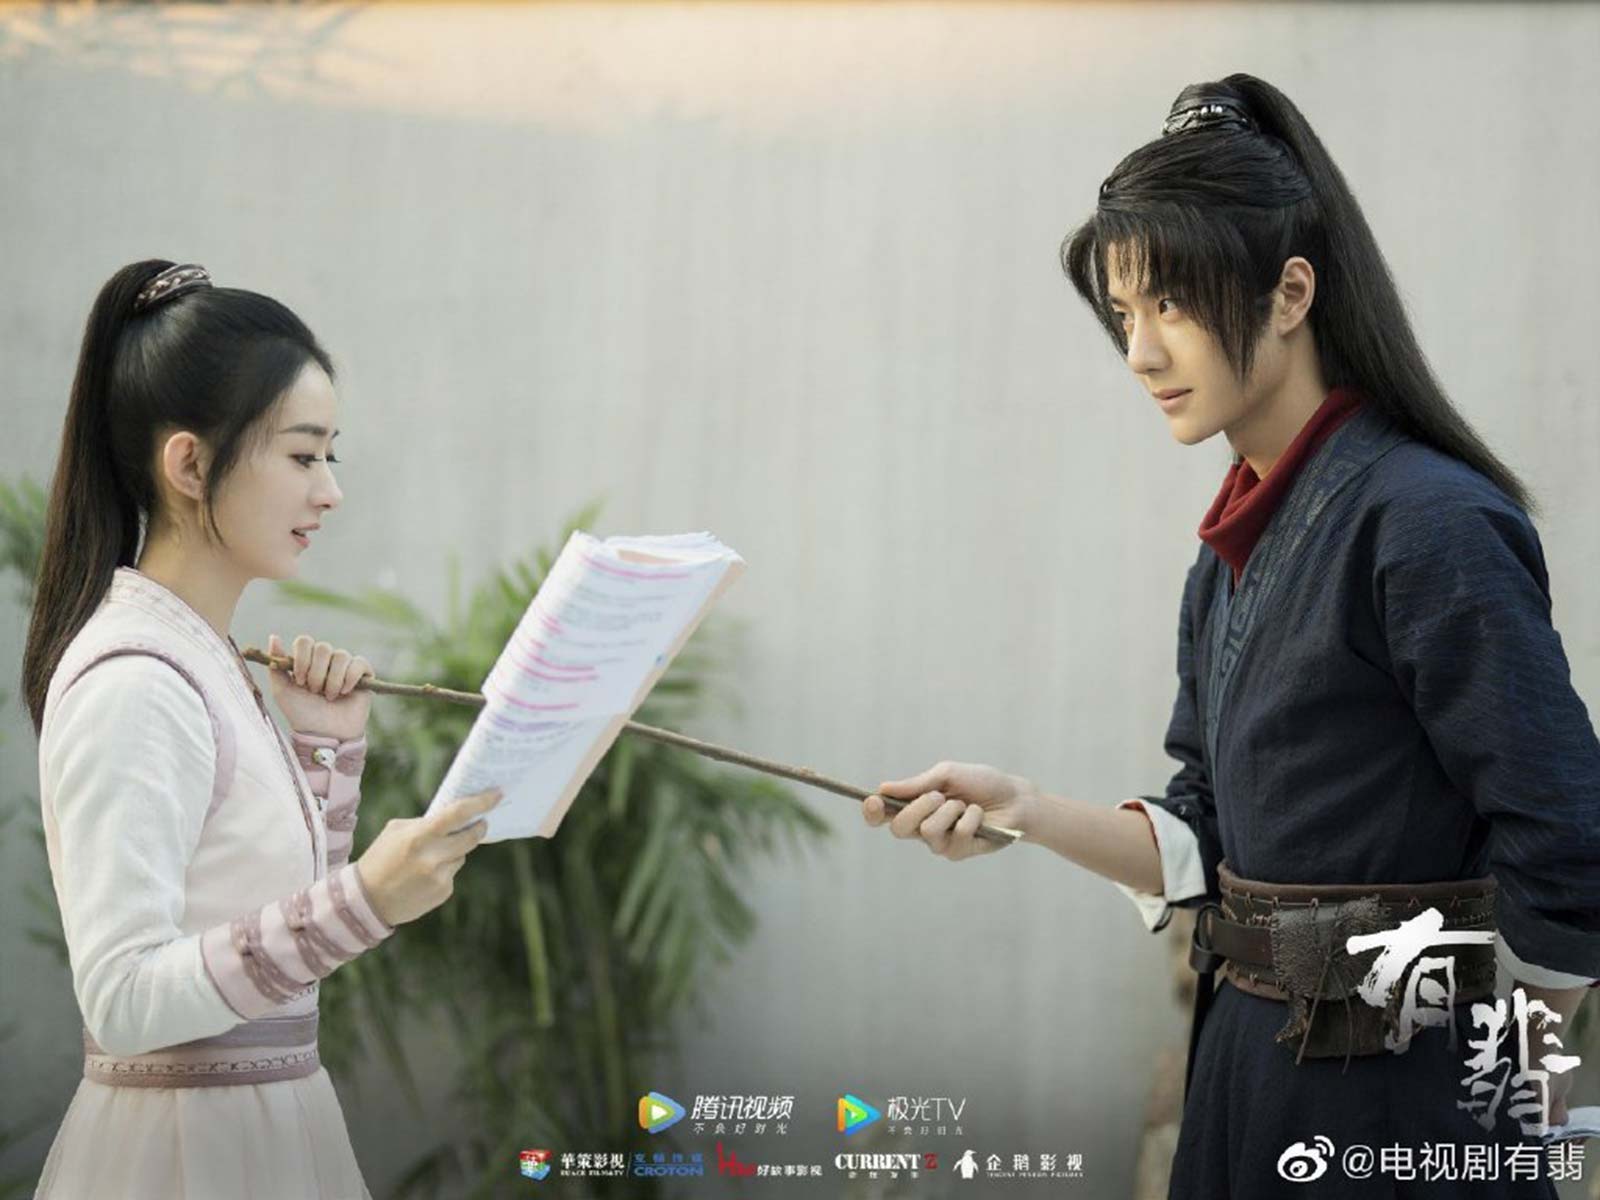 If you're in love with Wang Yibo like the rest of us, you've been binging 'Legend of Fei' like crazy. Relive the most beautiful moments of the show so far.